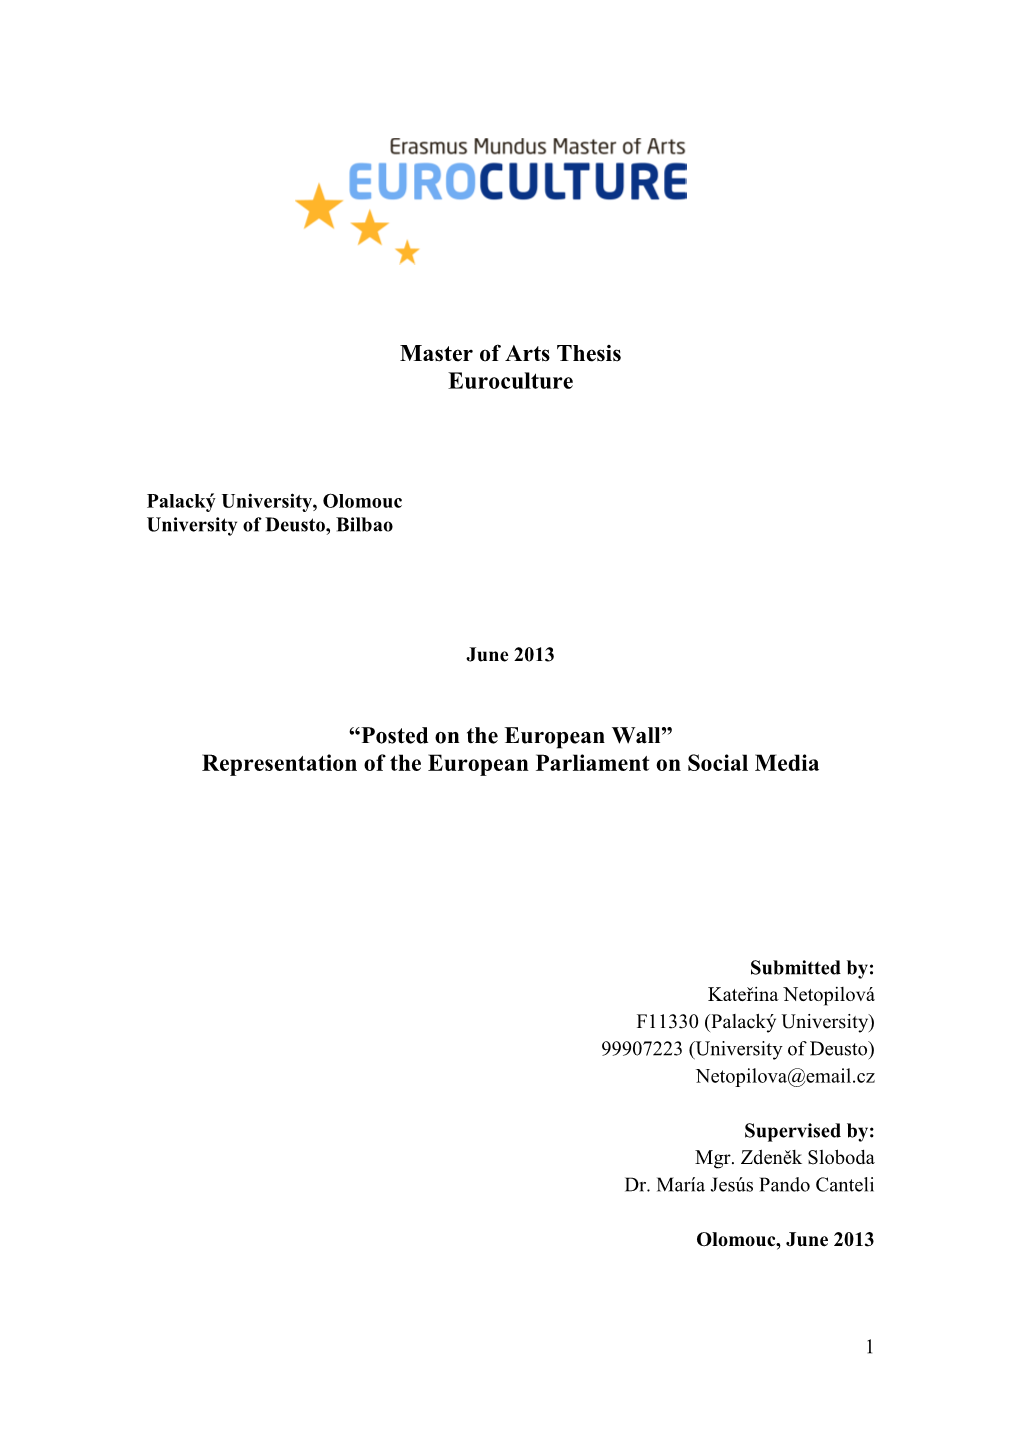 Master of Arts Thesis Euroculture “Posted on The